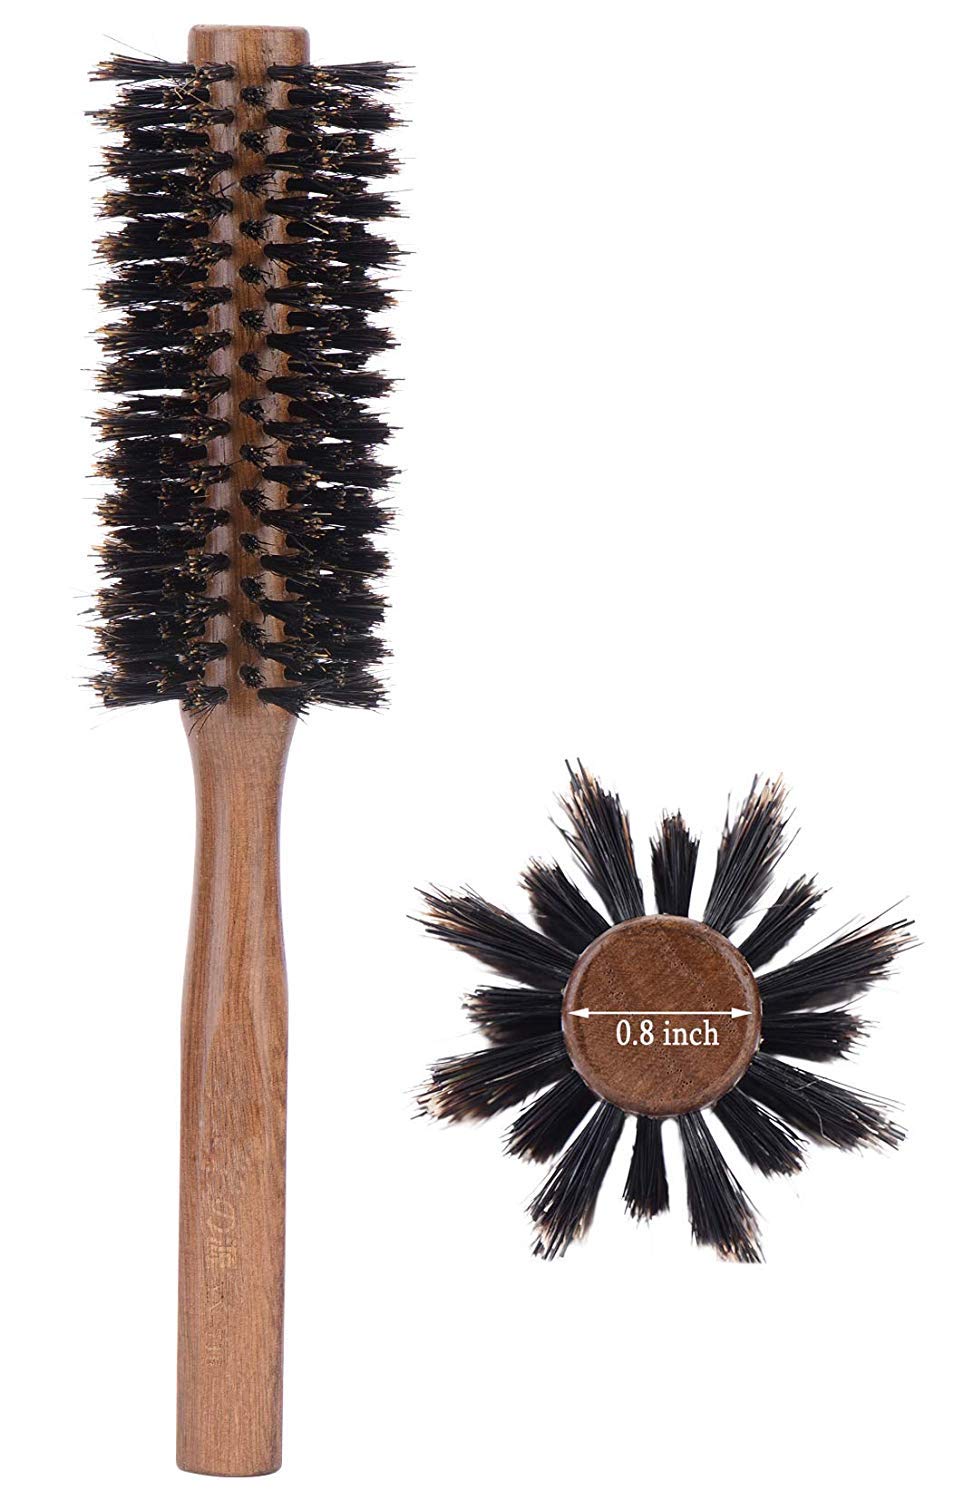 Boar Bristle Round Hair Brush for Blow Drying, 2 Inch, [...]